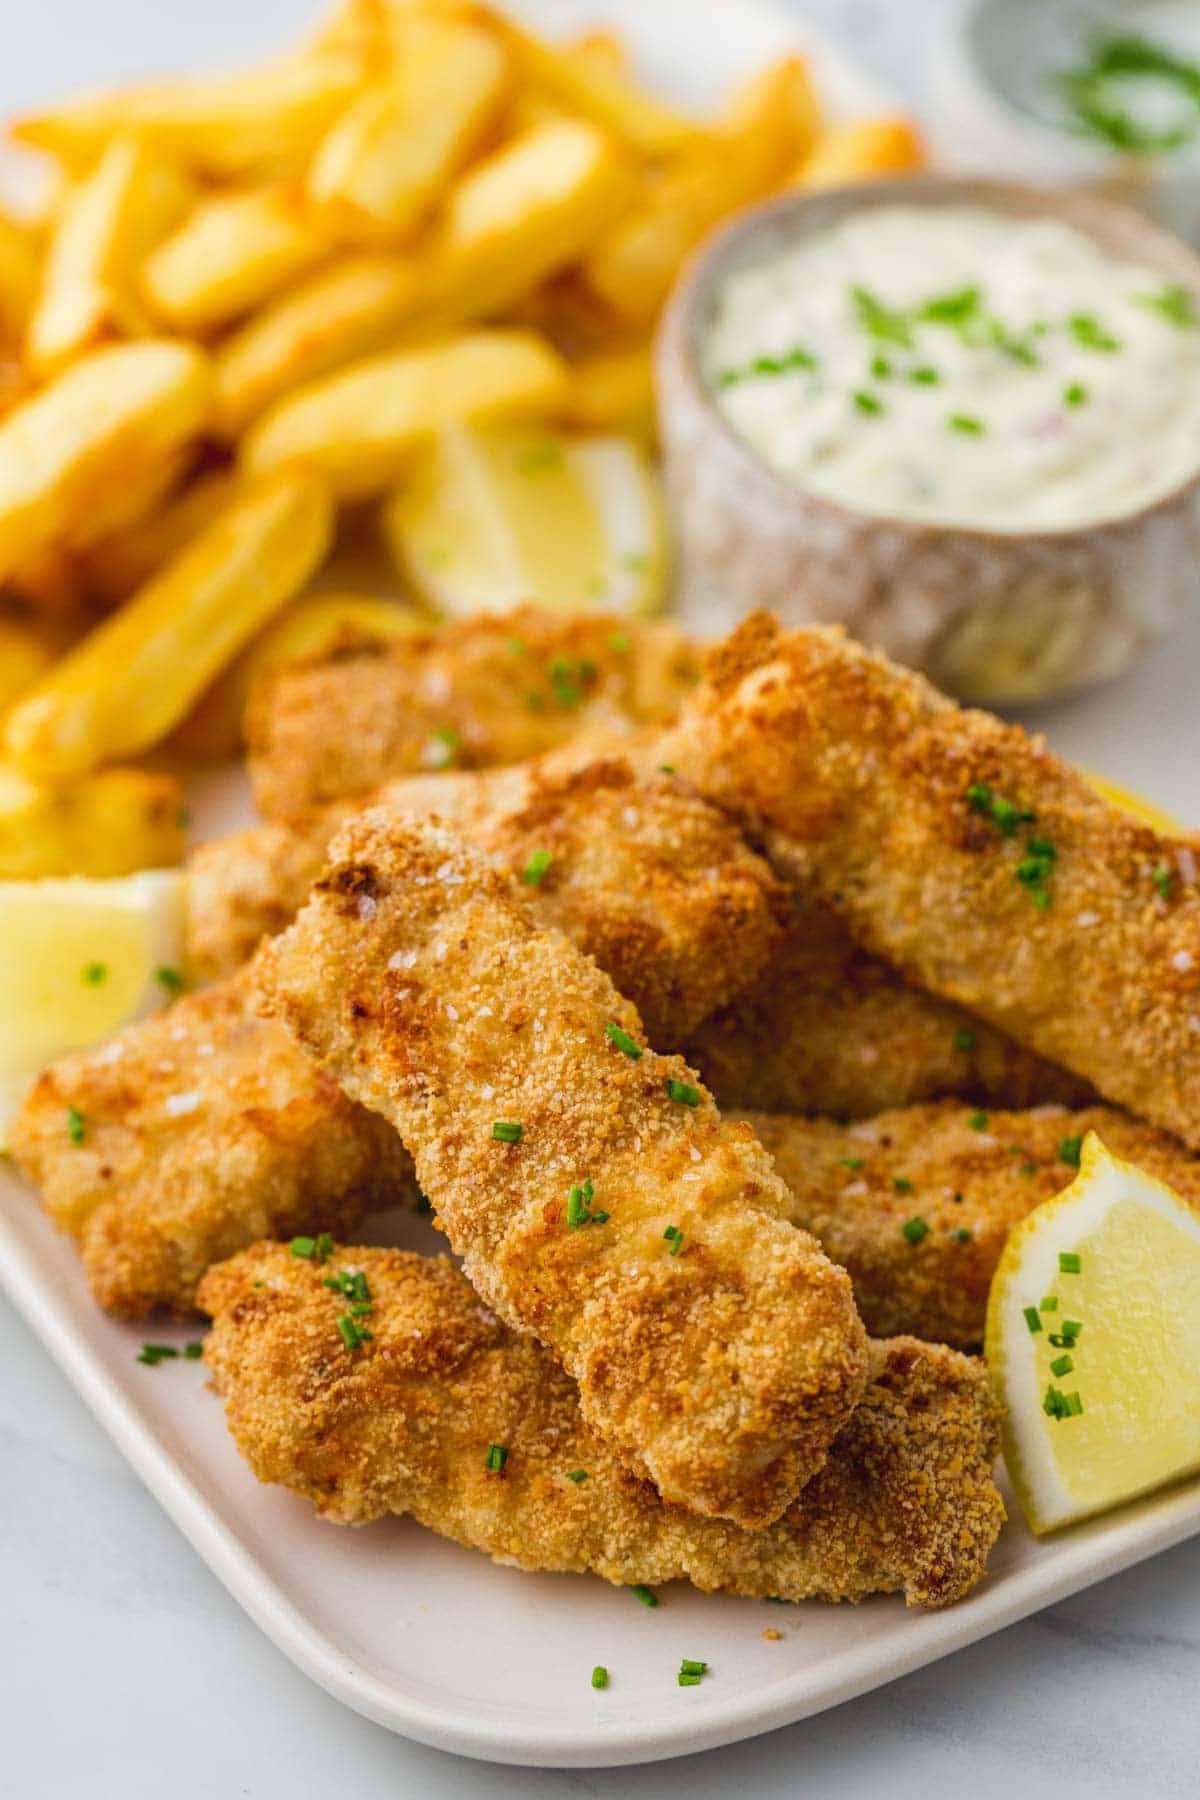 Fish sticks stacked on each other, with fresh lemon wedges on the side.